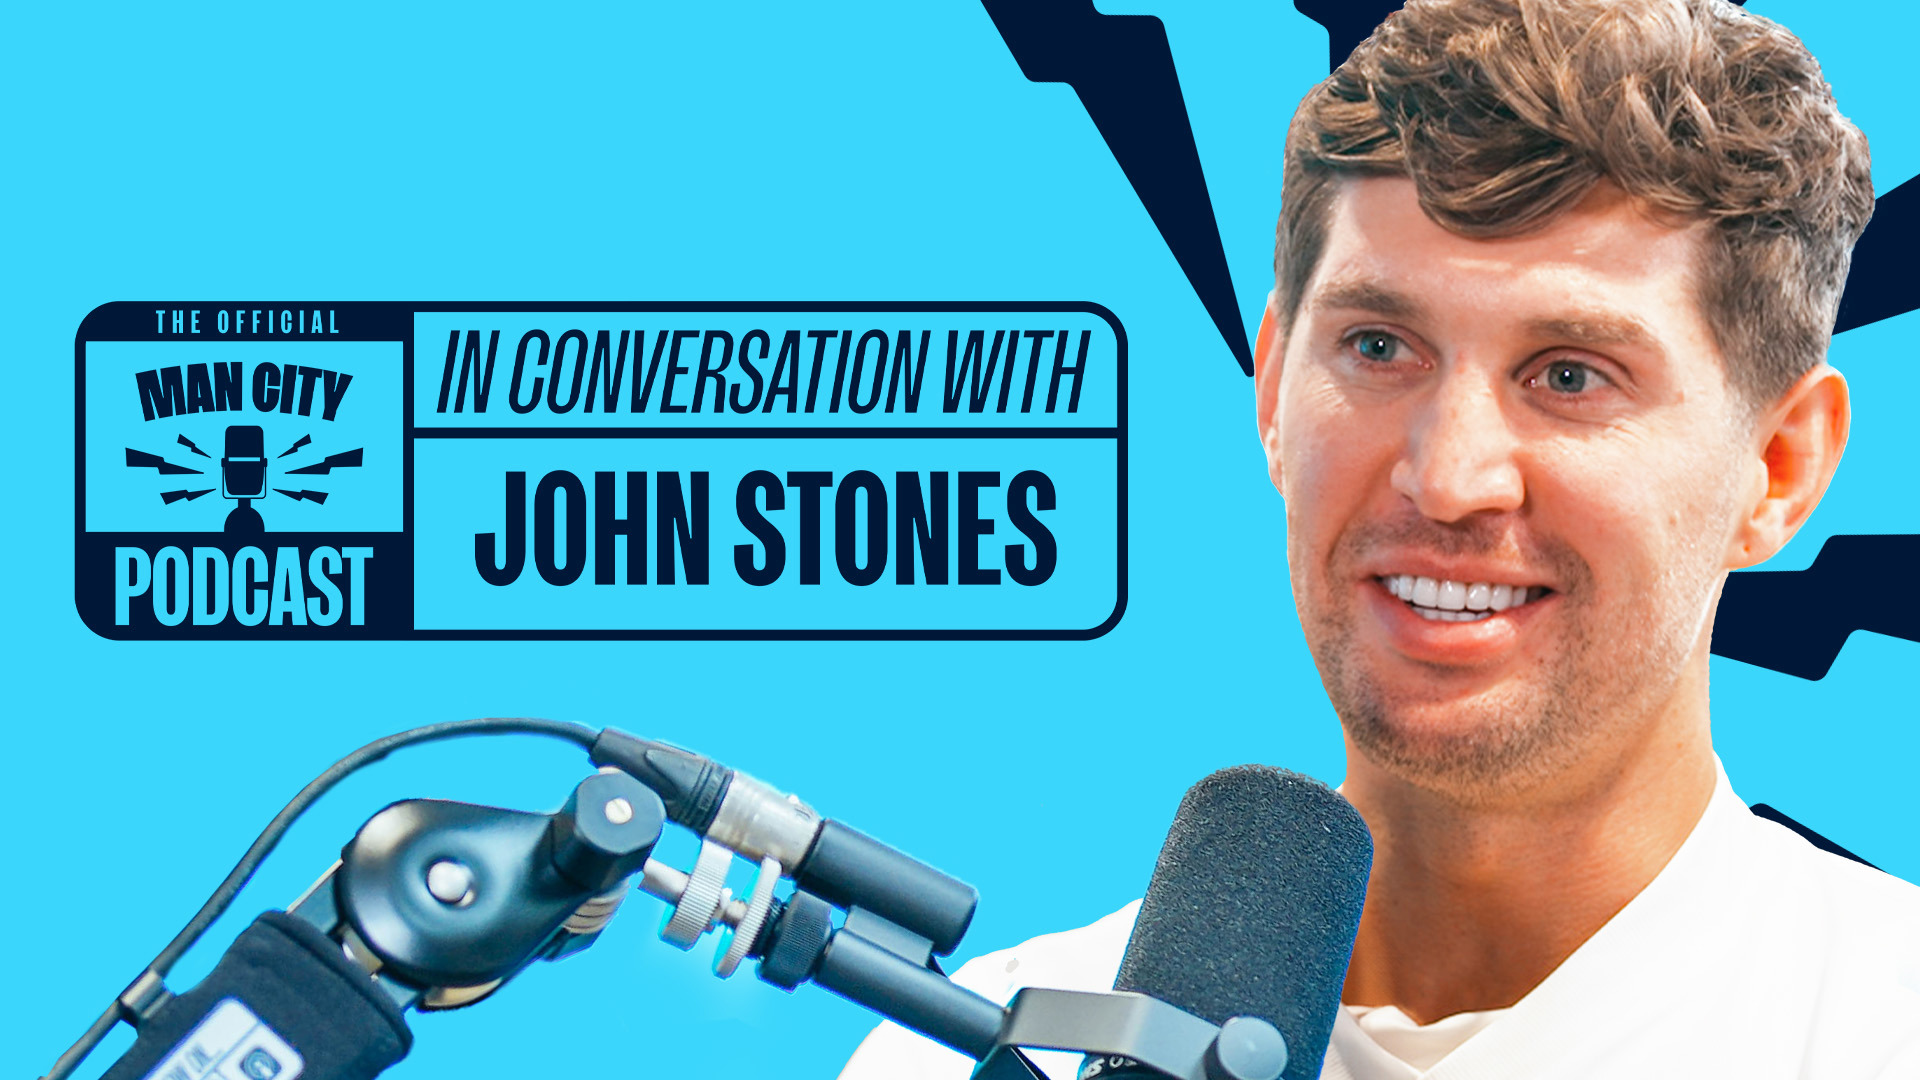 In Conversation with John Stones | Official Man City Podcast